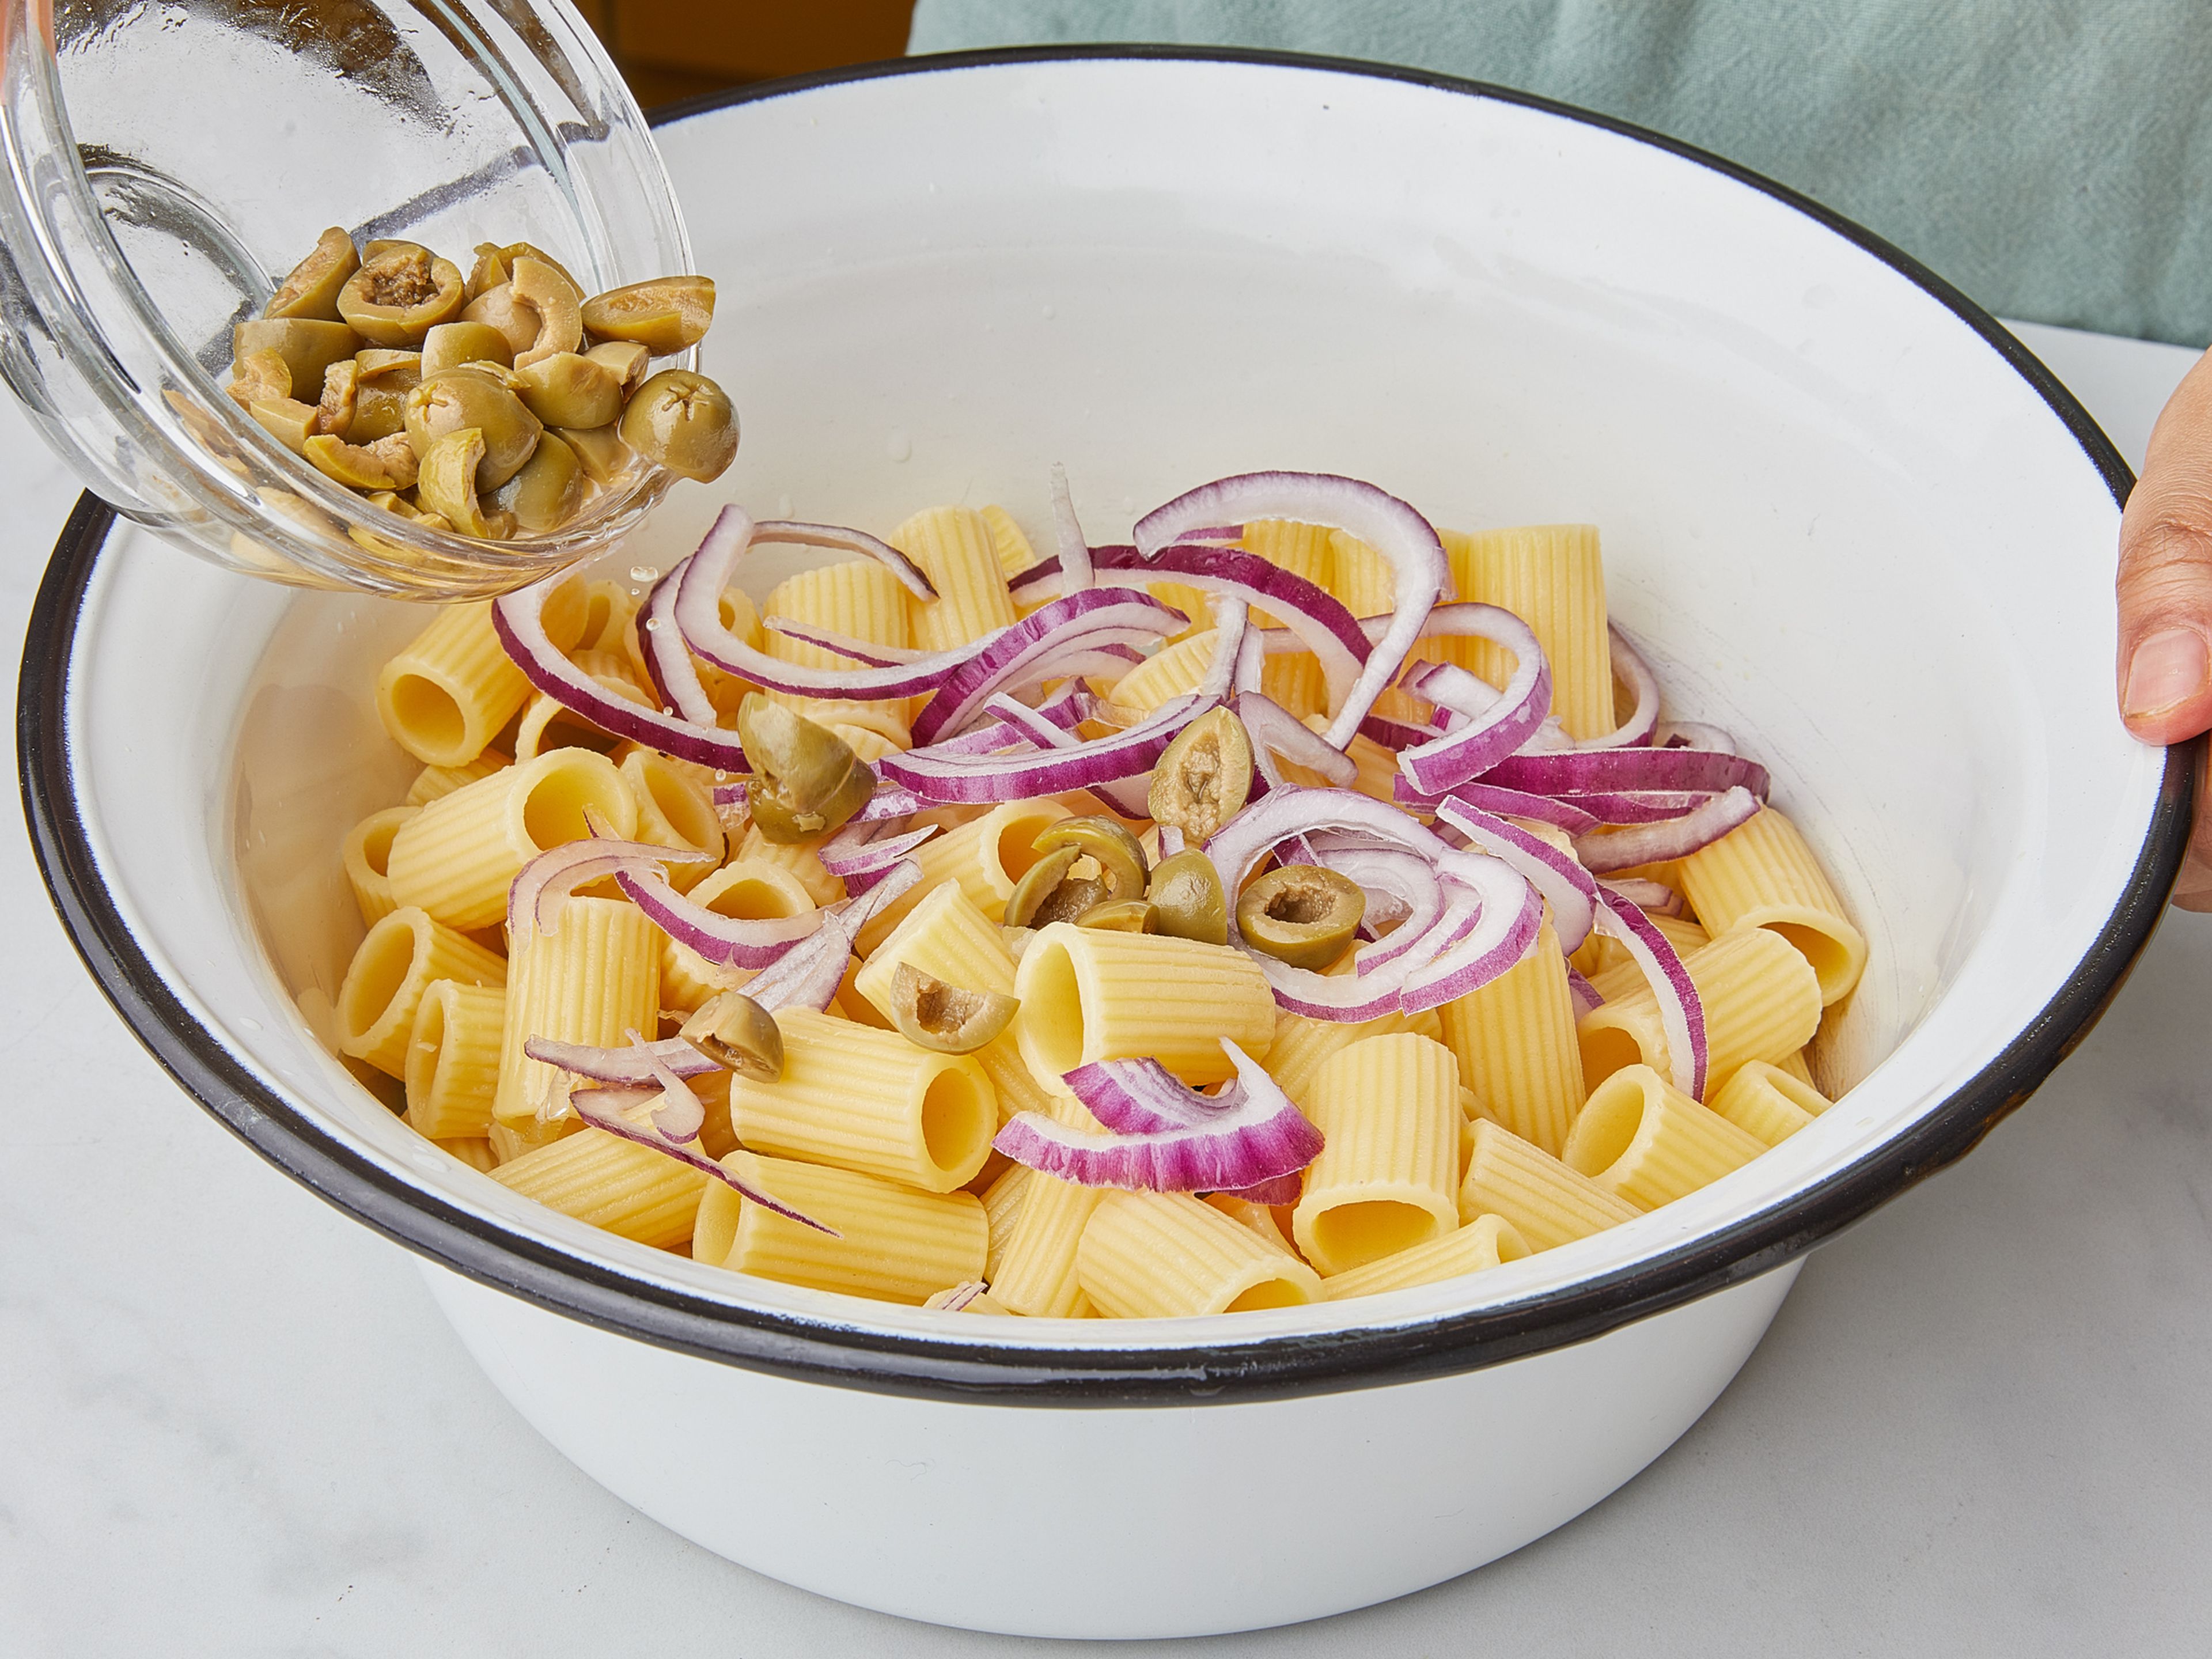 Now add lemon zest and juice, the rest of the drained and raw red onion, olives, herbs and nuts to the pasta and zucchini. Toss together, season with salt and pepper to taste. Serve with some freshly grated parmesan cheese and more oil if desired.